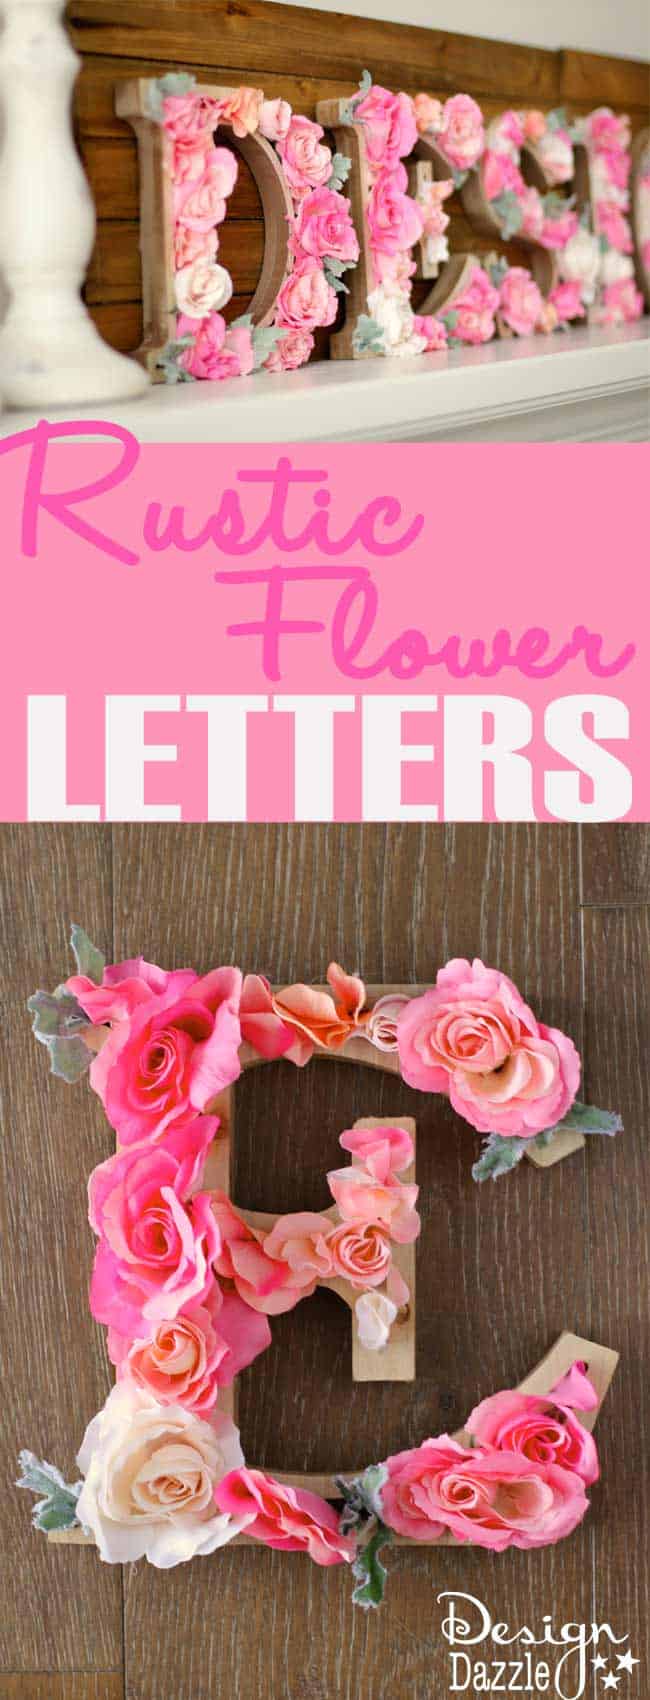 Make your own Rustic Flower Letters. Sweet idea for a nursery, bedroom or craft room. Tutorial on Design Dazzle. #MichaelsMakers